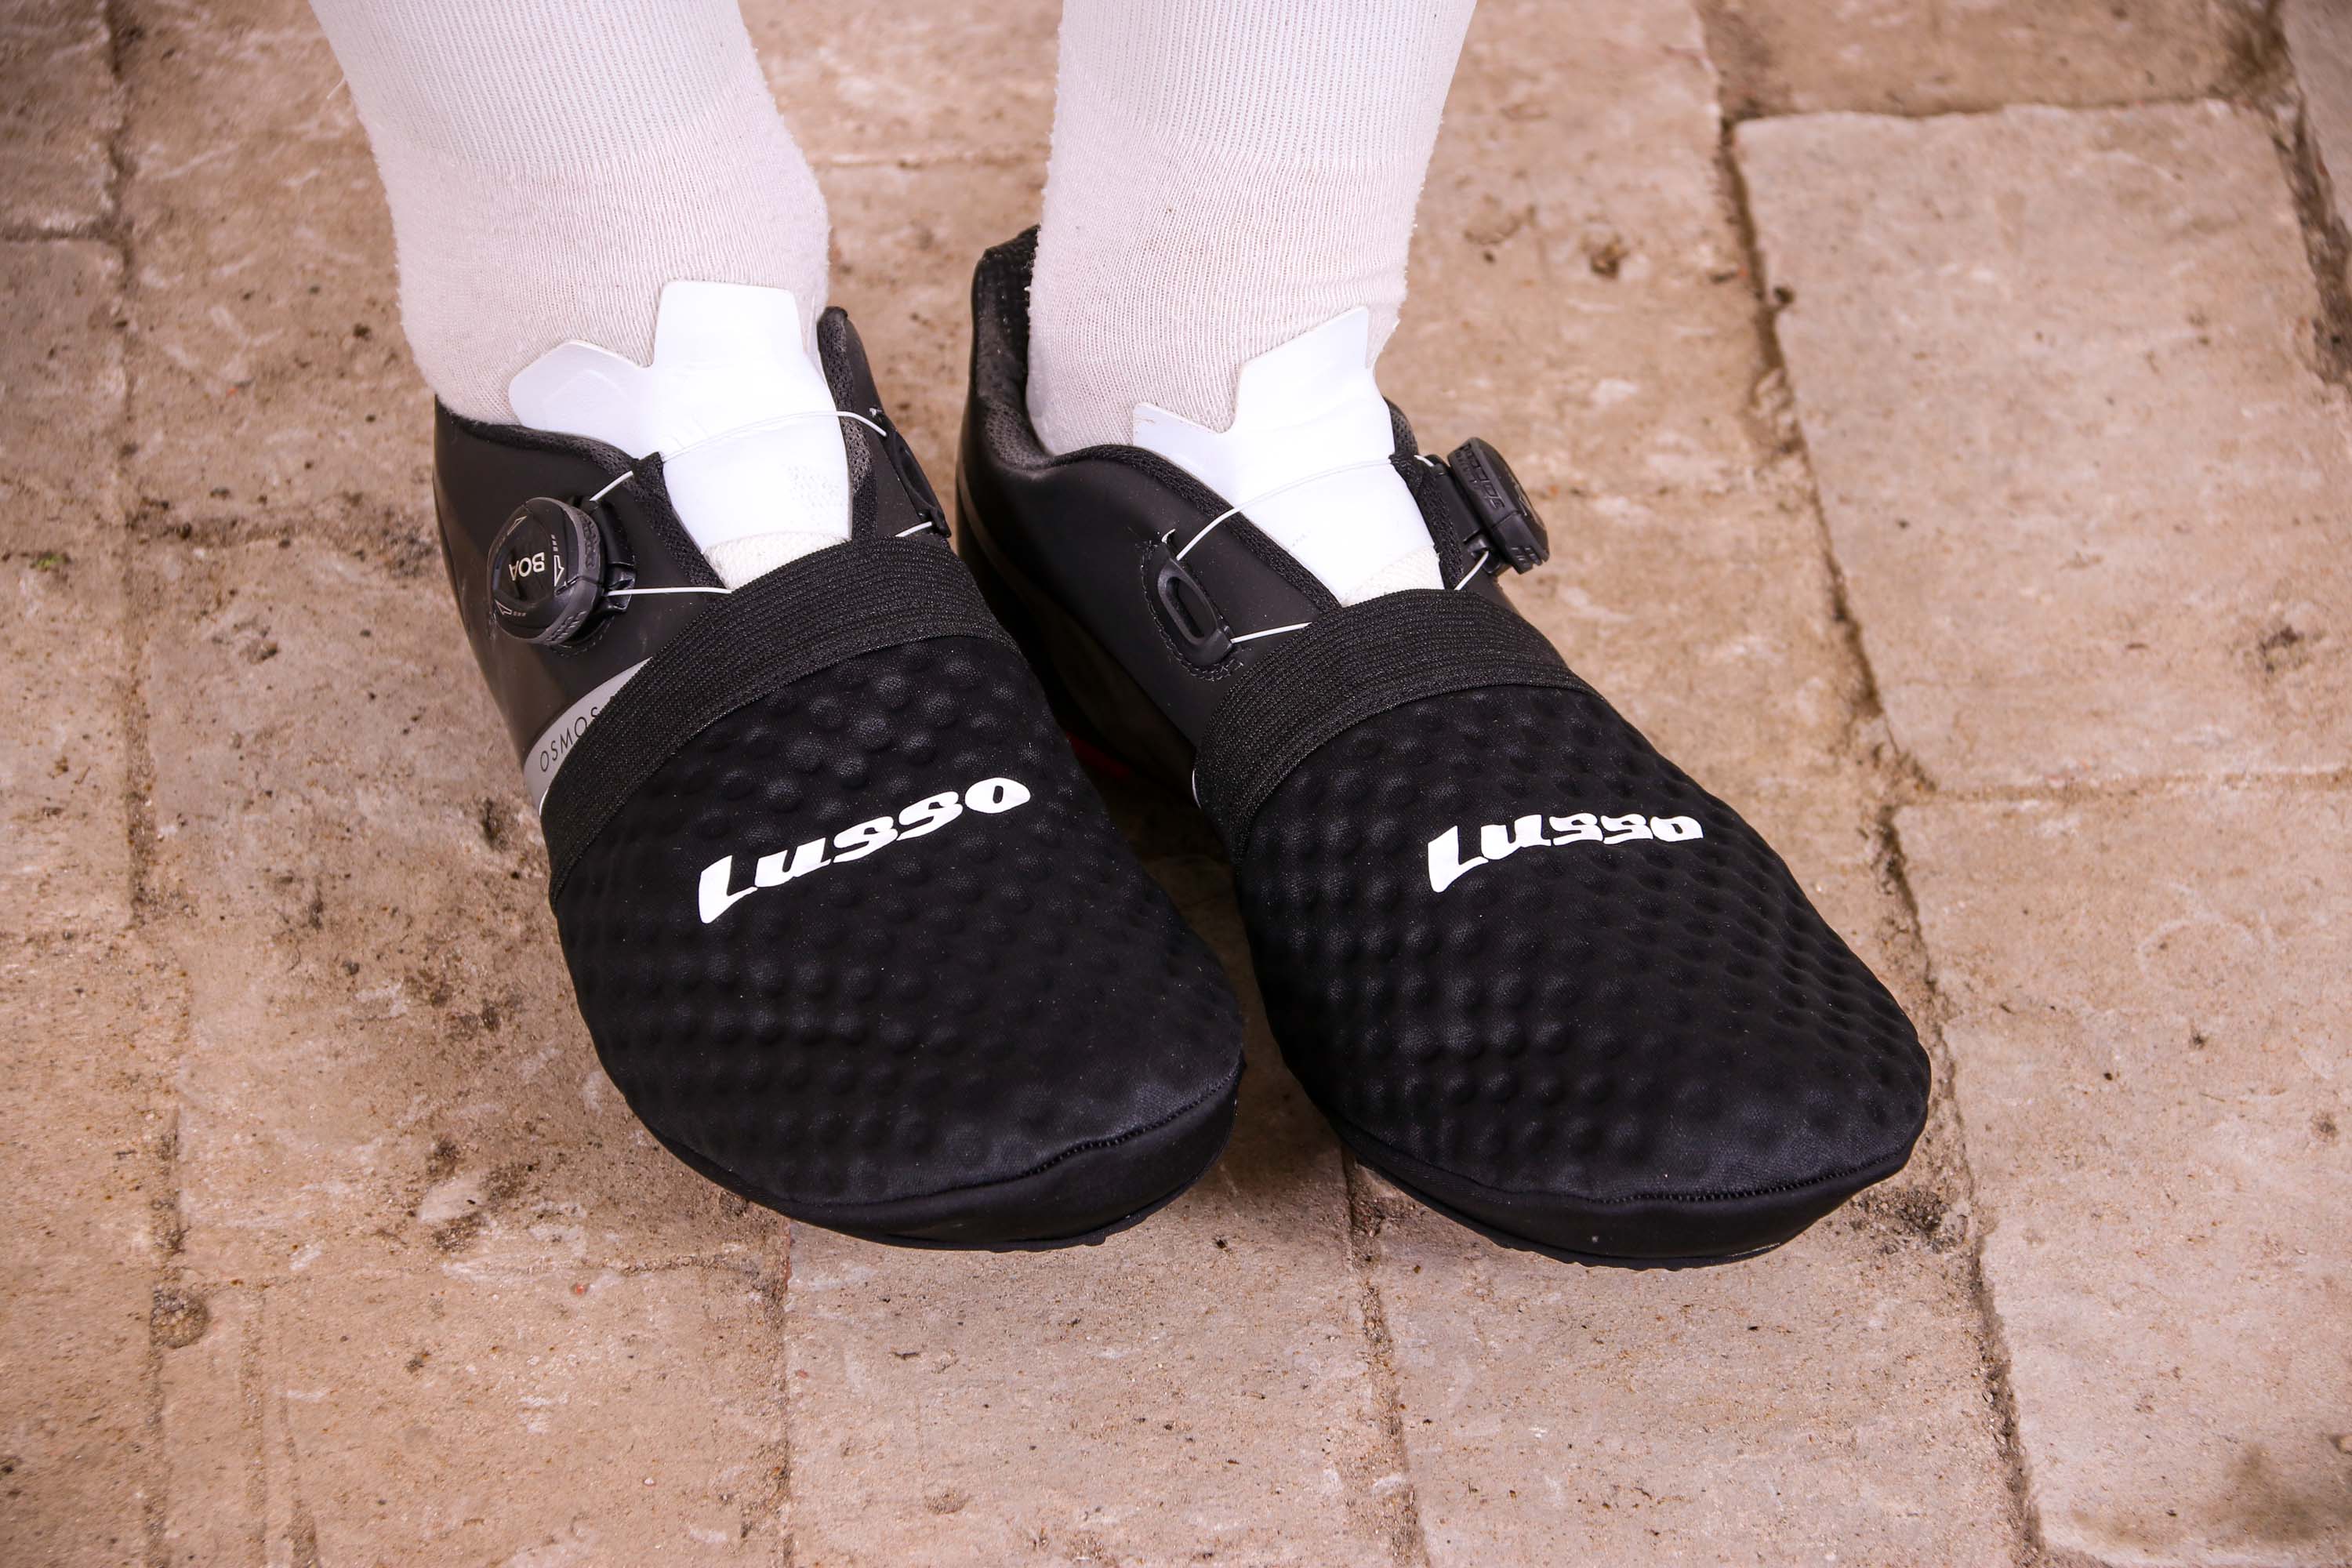 Review: Lusso Thermal Toe Covers | road.cc